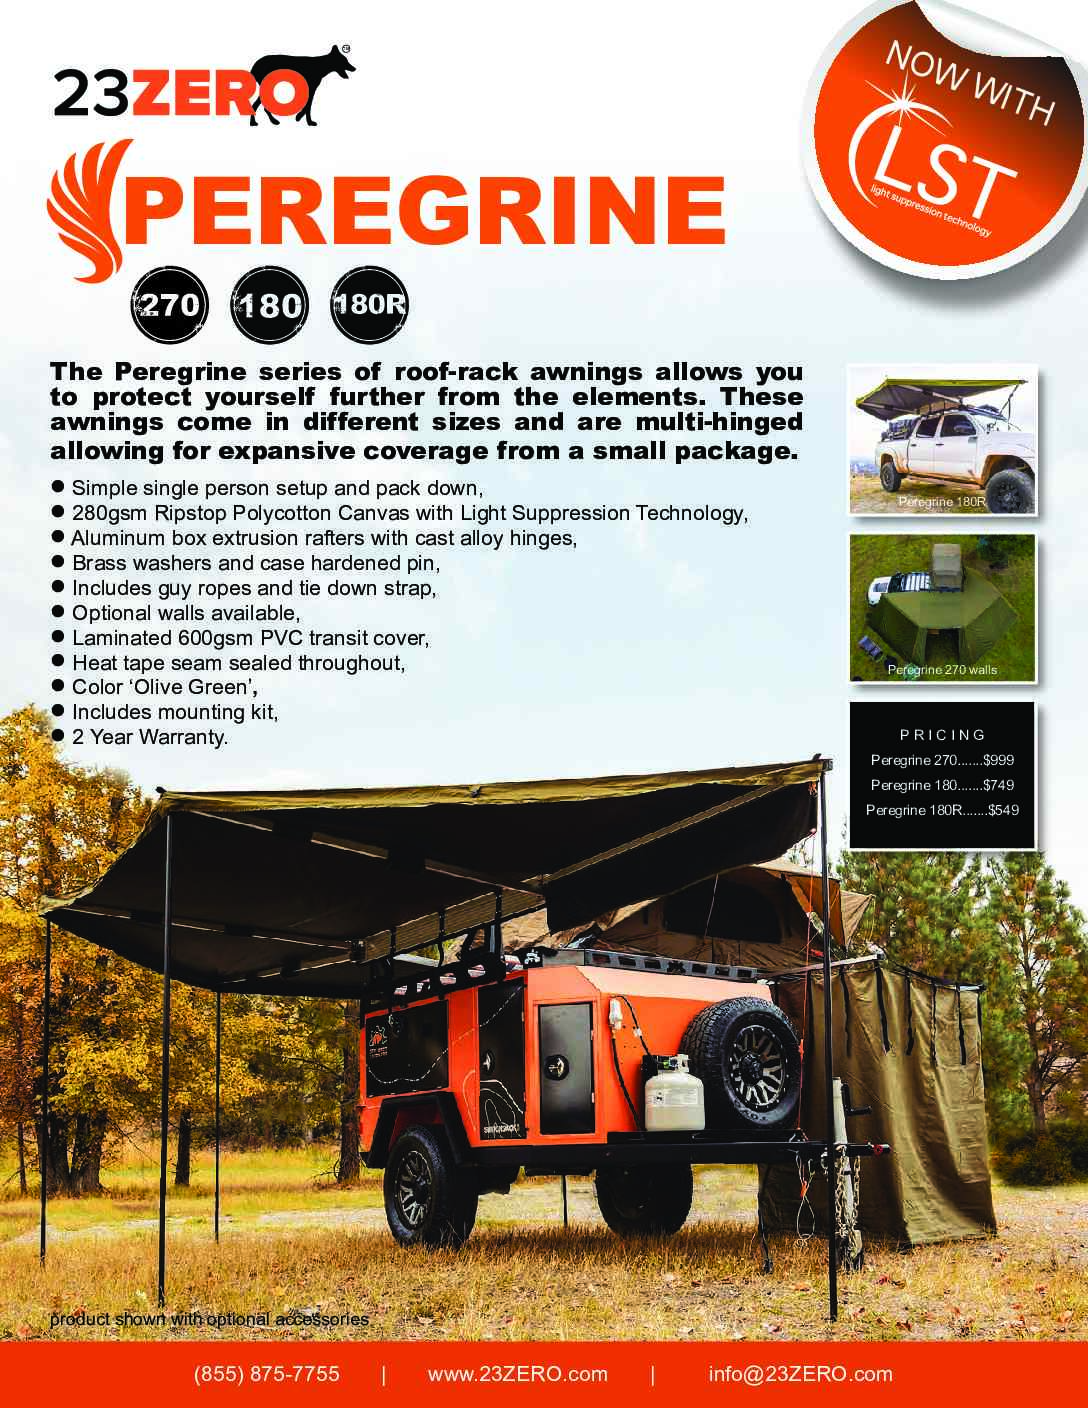 180° PEREGRINE AWNING WITH LIGHT 2.0 SUPPRESSION TECHNOLOGY